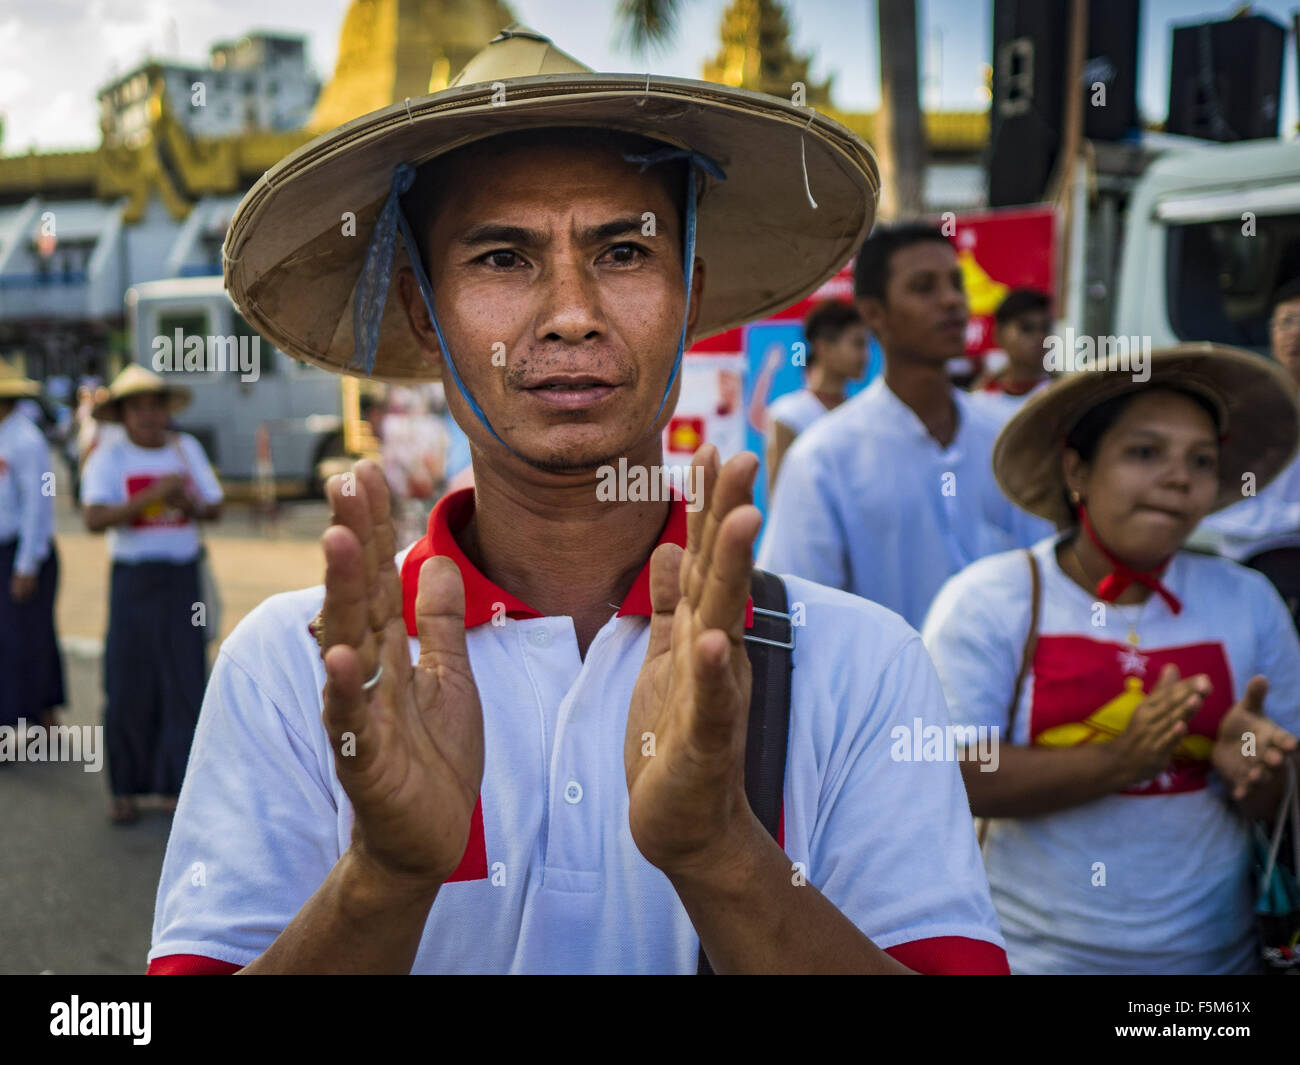 Yangon, Yangon Division, Myanmar. 6th Nov, 2015. A man applauds the speakers at the final NDF election rally of the 2015 election. The rally was held in central Yangon, next to the historic Sule Pagoda and across the street from Yangon city hall. The National Democratic Force (NDF) was formed by former members of the National League for Democracy (NLD) who chose to contest the 2010 general election in Myanmar because the NLD boycotted that election. There have been mass defections from the NFD this year because many of the people who joined the NFD in 2010 have gone back to the NLD, which is Stock Photo